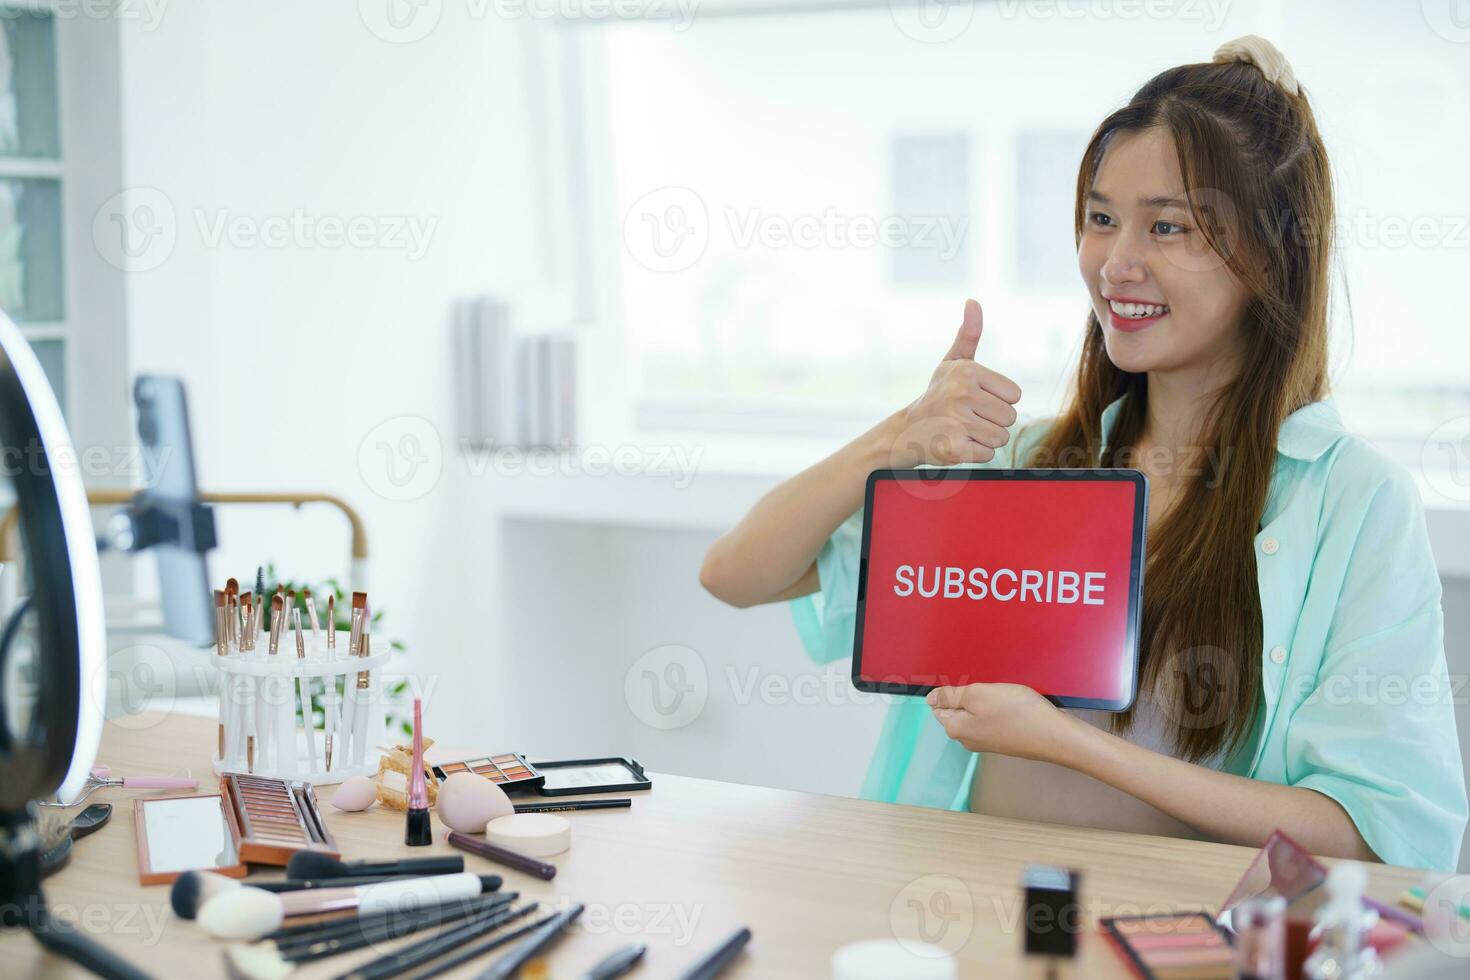 Online marketing Beauty influencer Asian girl Using Social Media for live streaming on Smartphone online audience like and subscribe to her channel. Like Follower photo